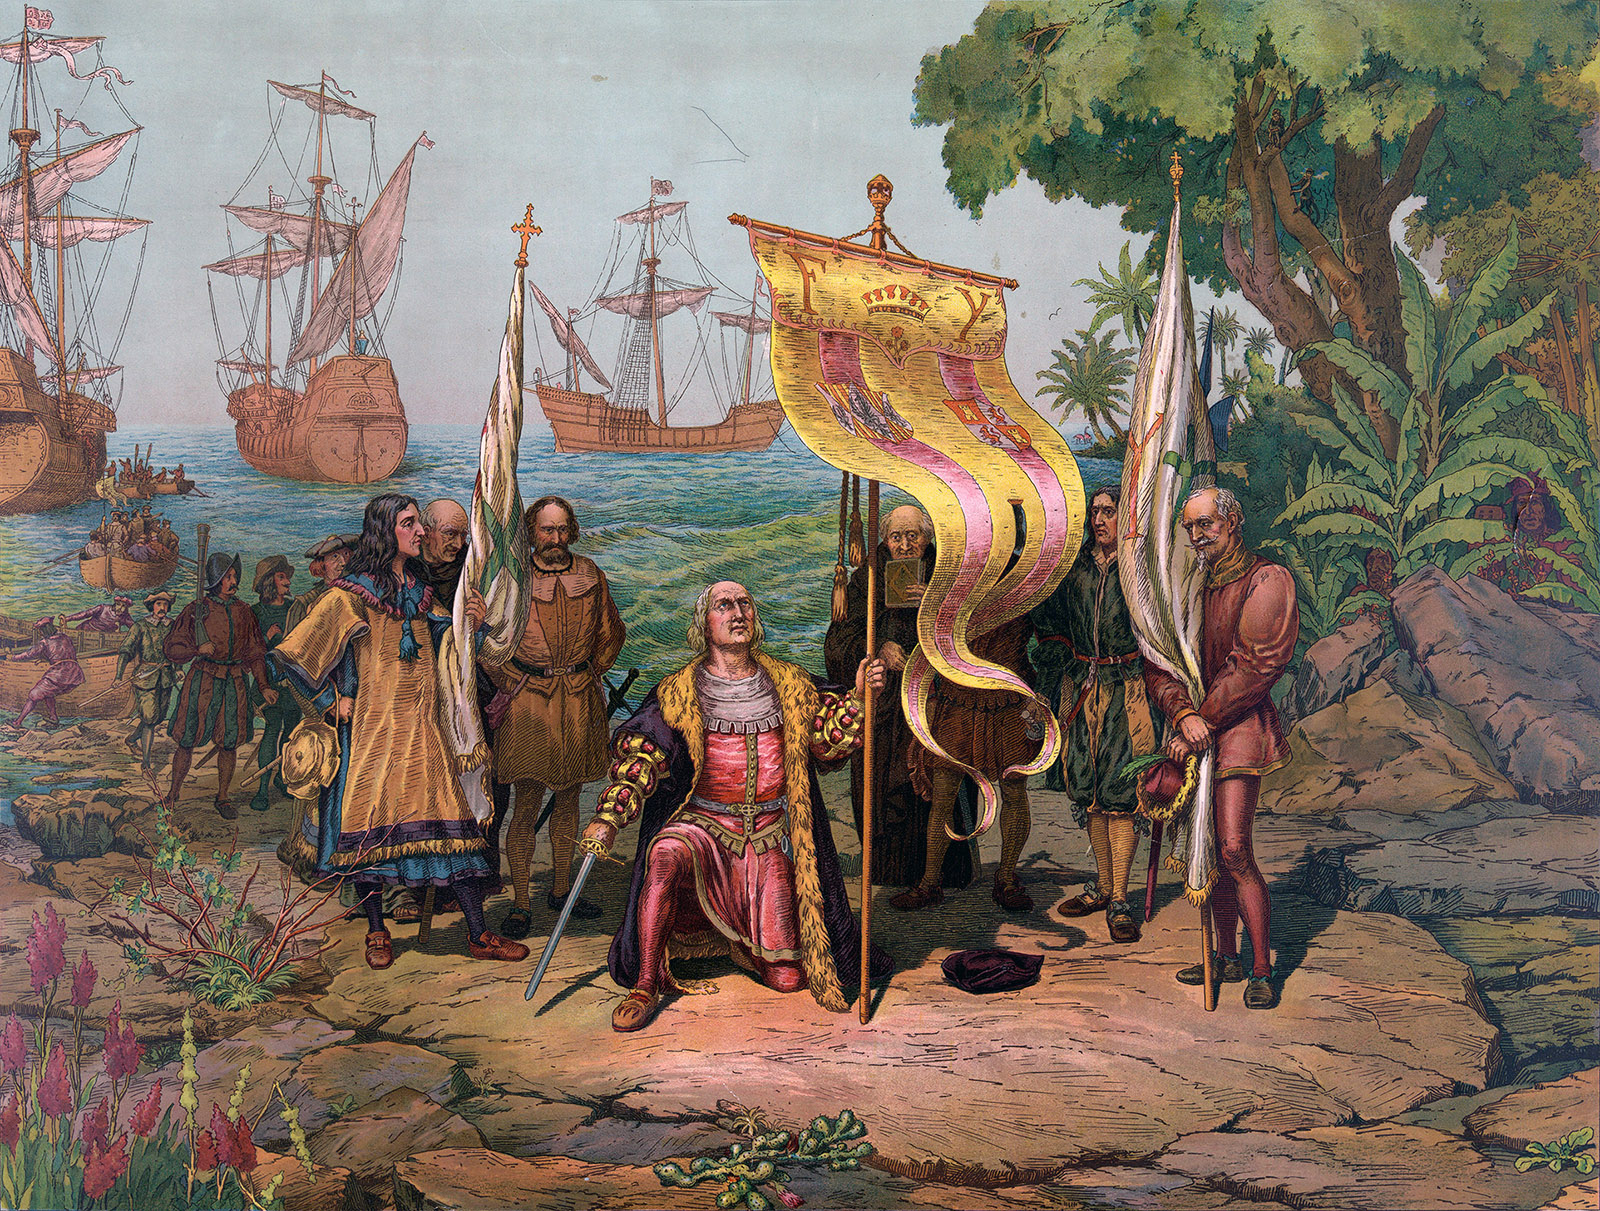 Columbus Day celebrates an ongoing threat to American democracy